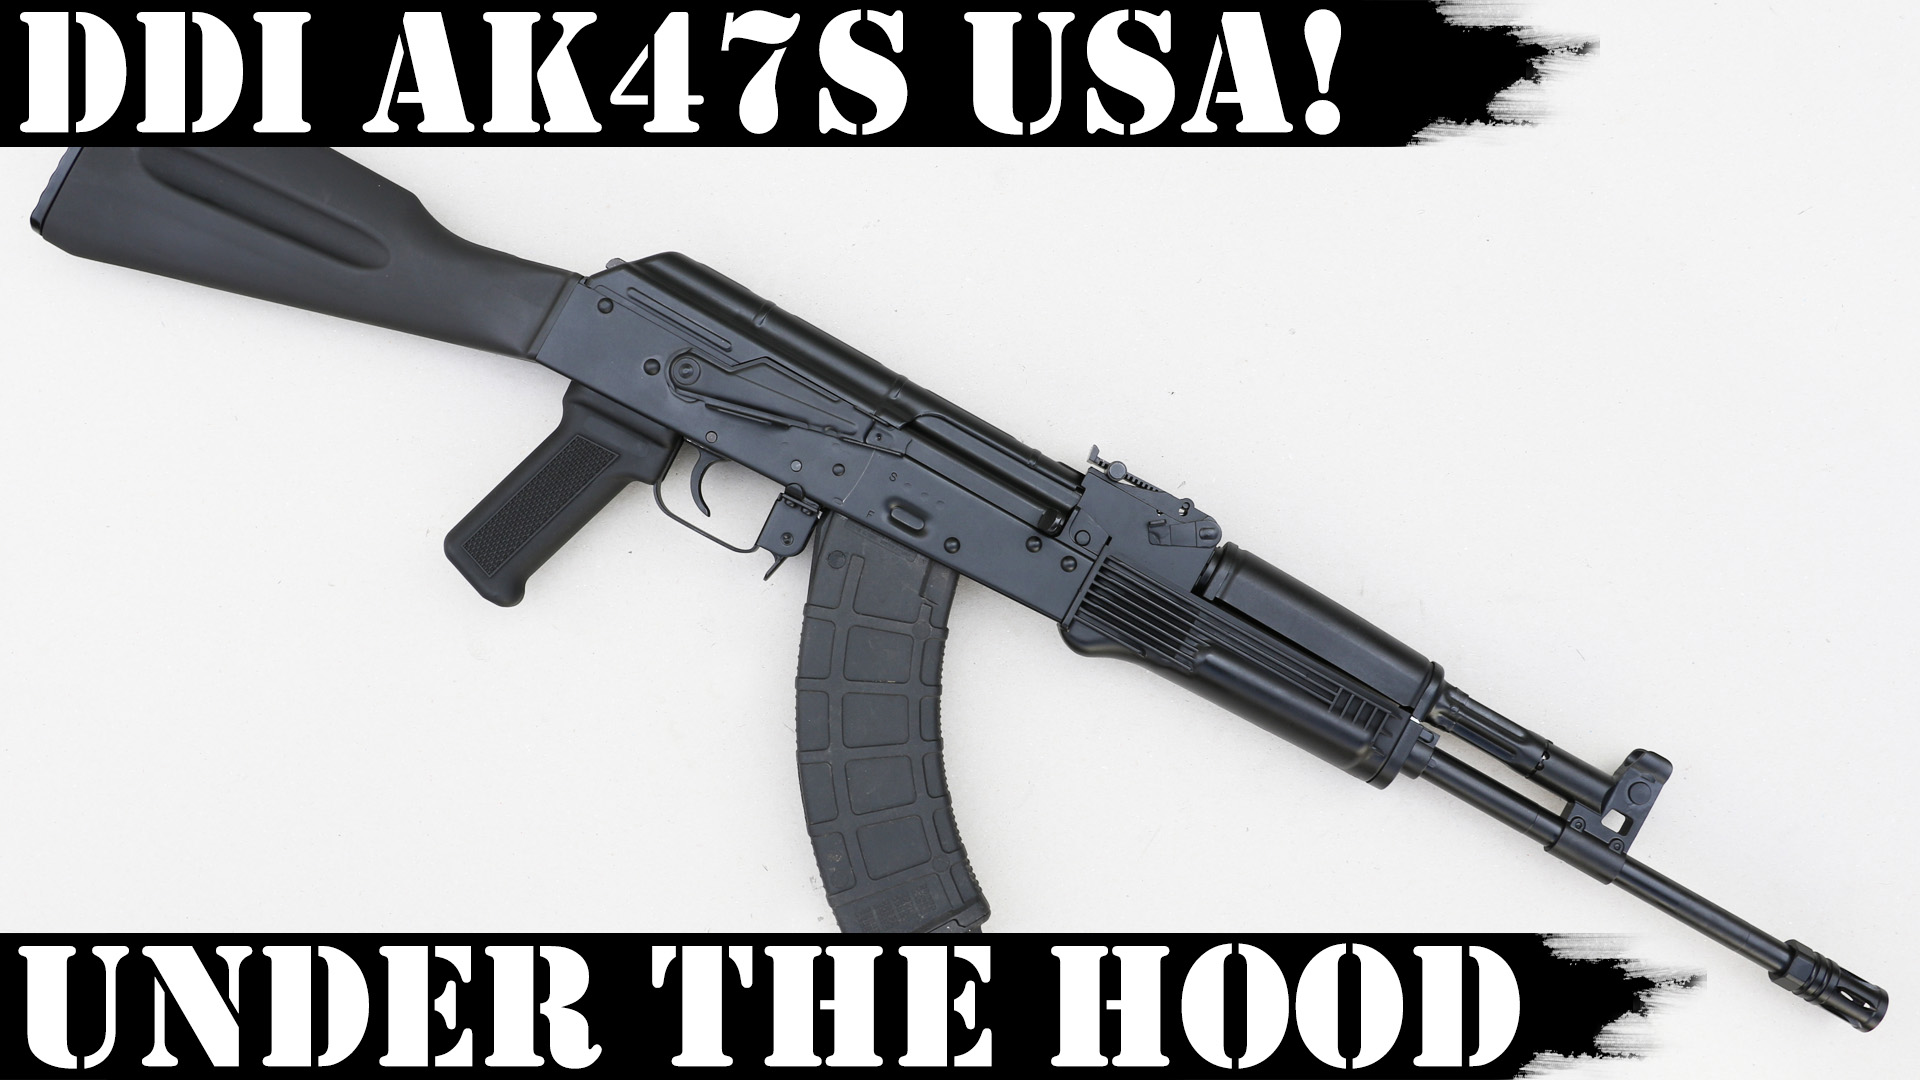 DDI AK47S Made in USA - Under the Hood! 